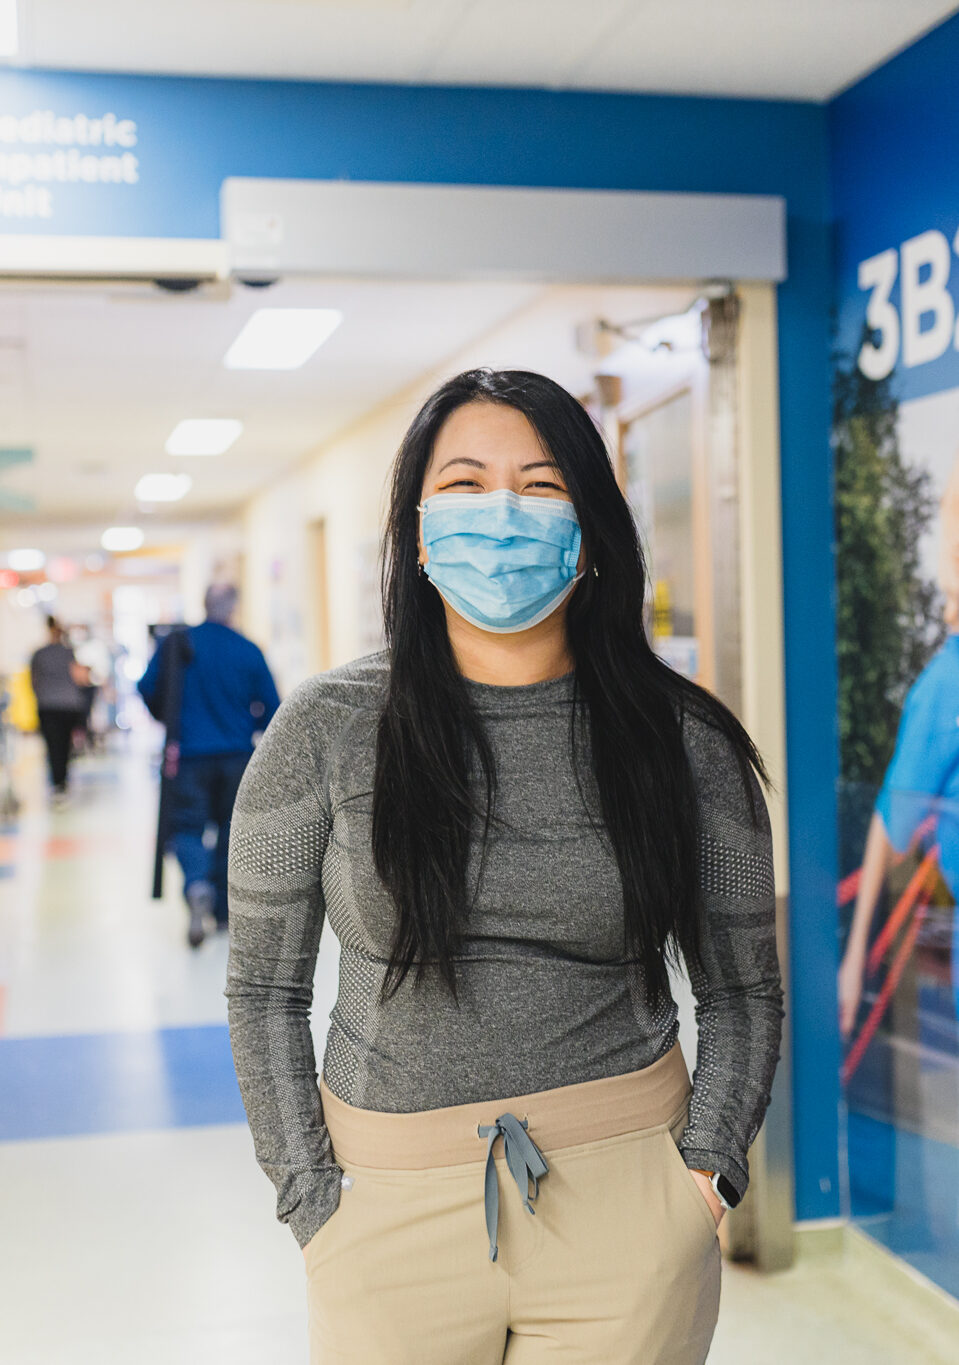 Registered Nurse Tran Thai works in the pediatric oncology department at Hamilton Health Sciences McMaster Children's Hospital. She is standing in the hospital hallway, in front of colourful wall murals. She has long dark hair and is wearing a medical mask.